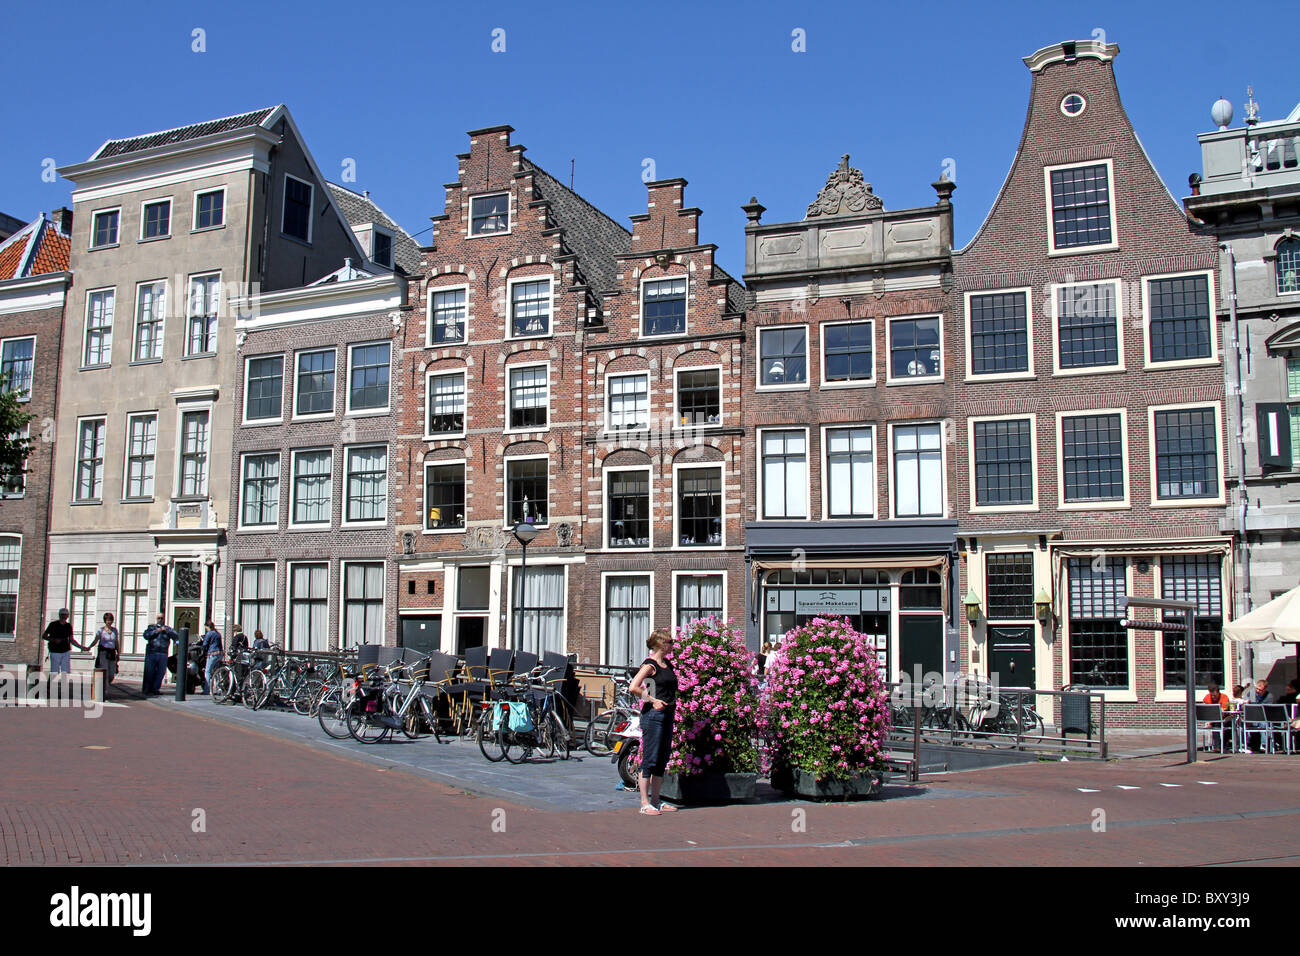 Traditional Dutch houses and architecture in Haarlem, Holland Stock Photo